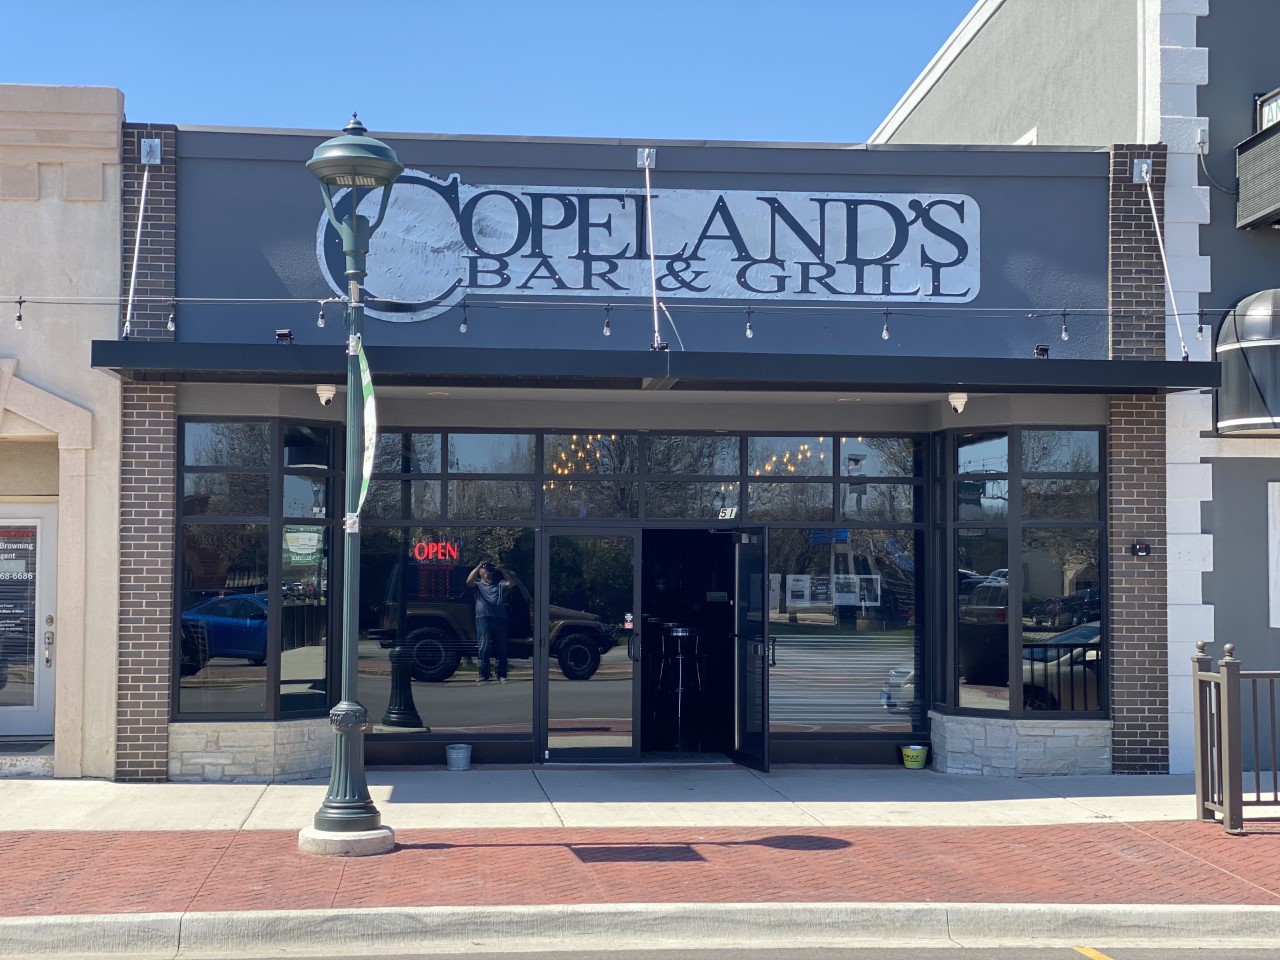 Copelands Bar and Grill